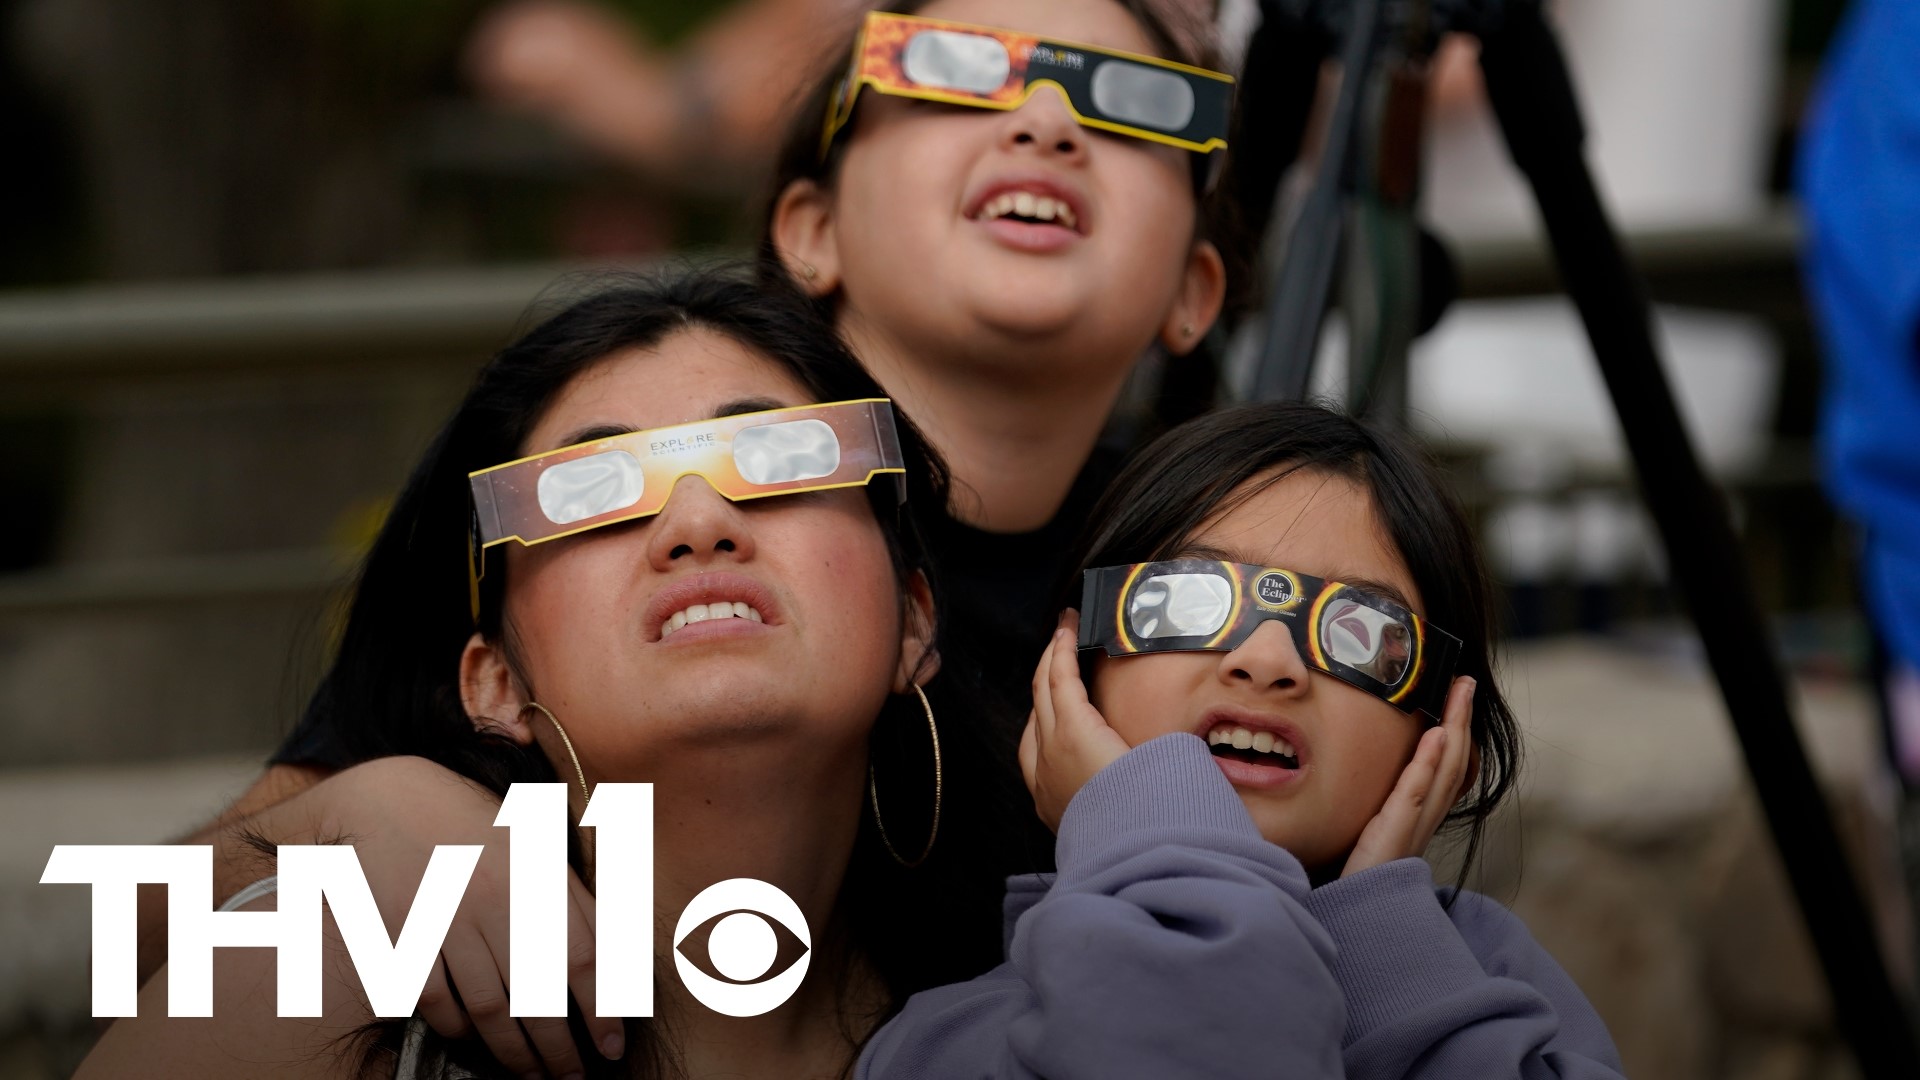 We're just one week away from the total solar eclipse and as the countdown to the big day continues, we're answering your most asked questions about the eclipse!